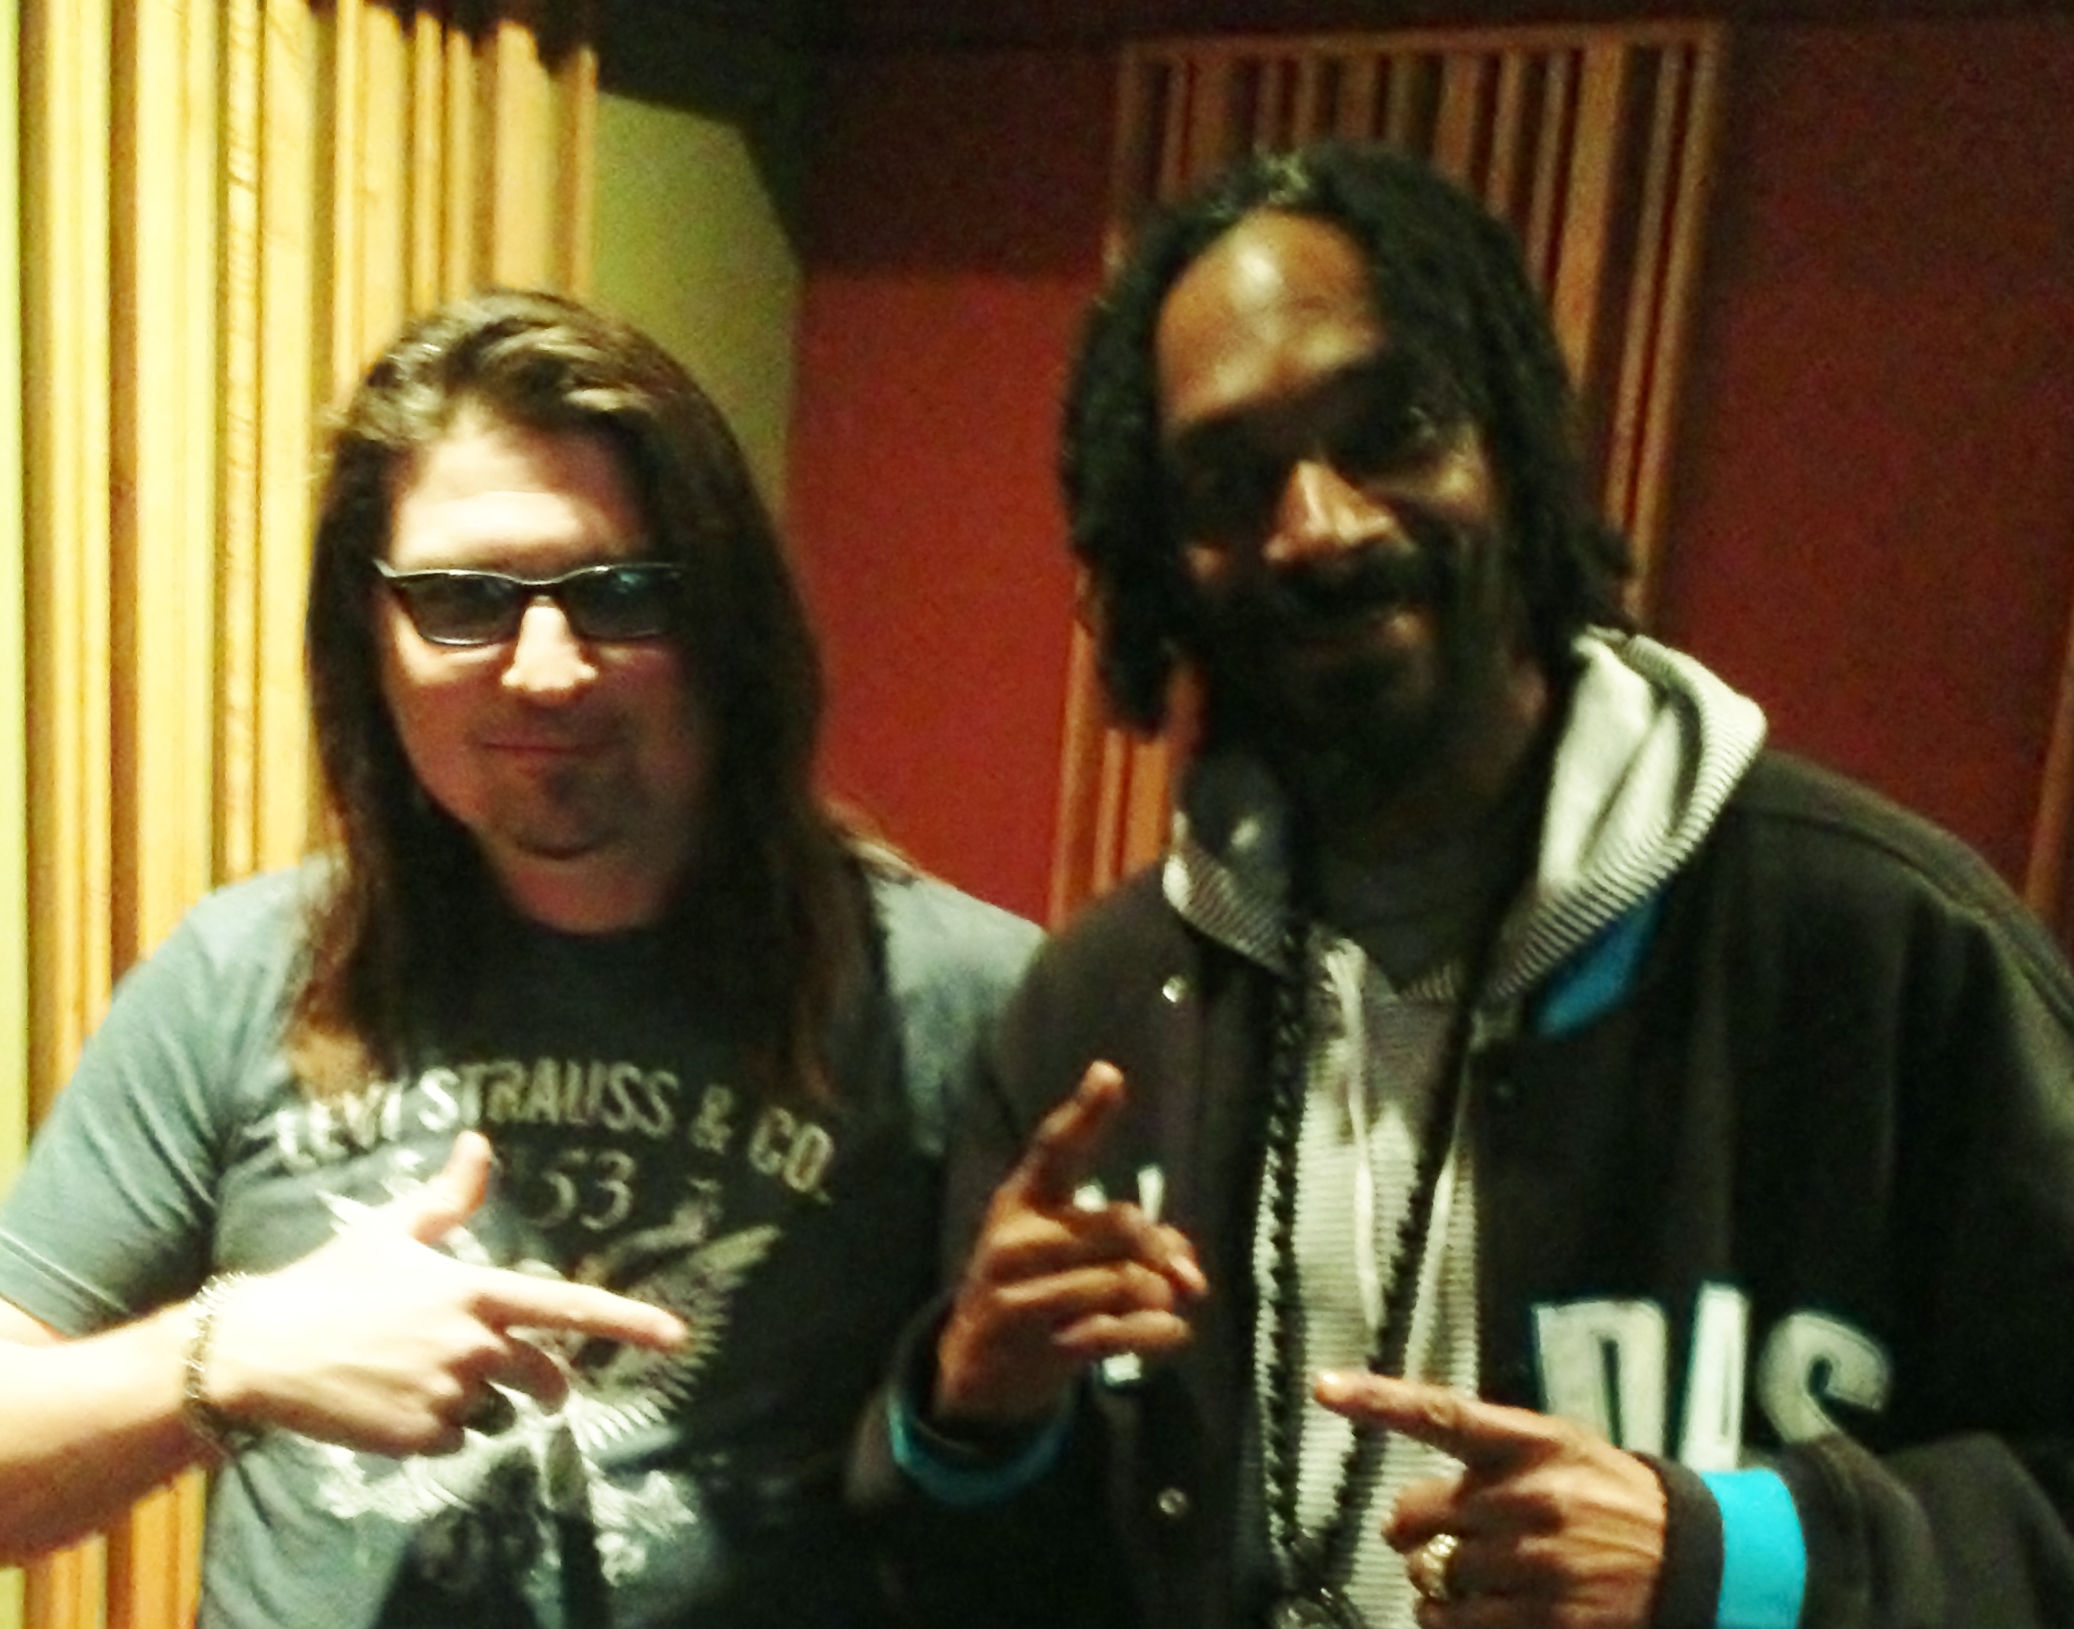 Chris Borders (left), and Snoop Lion (right) recording sessions for DreamWorks SKG 